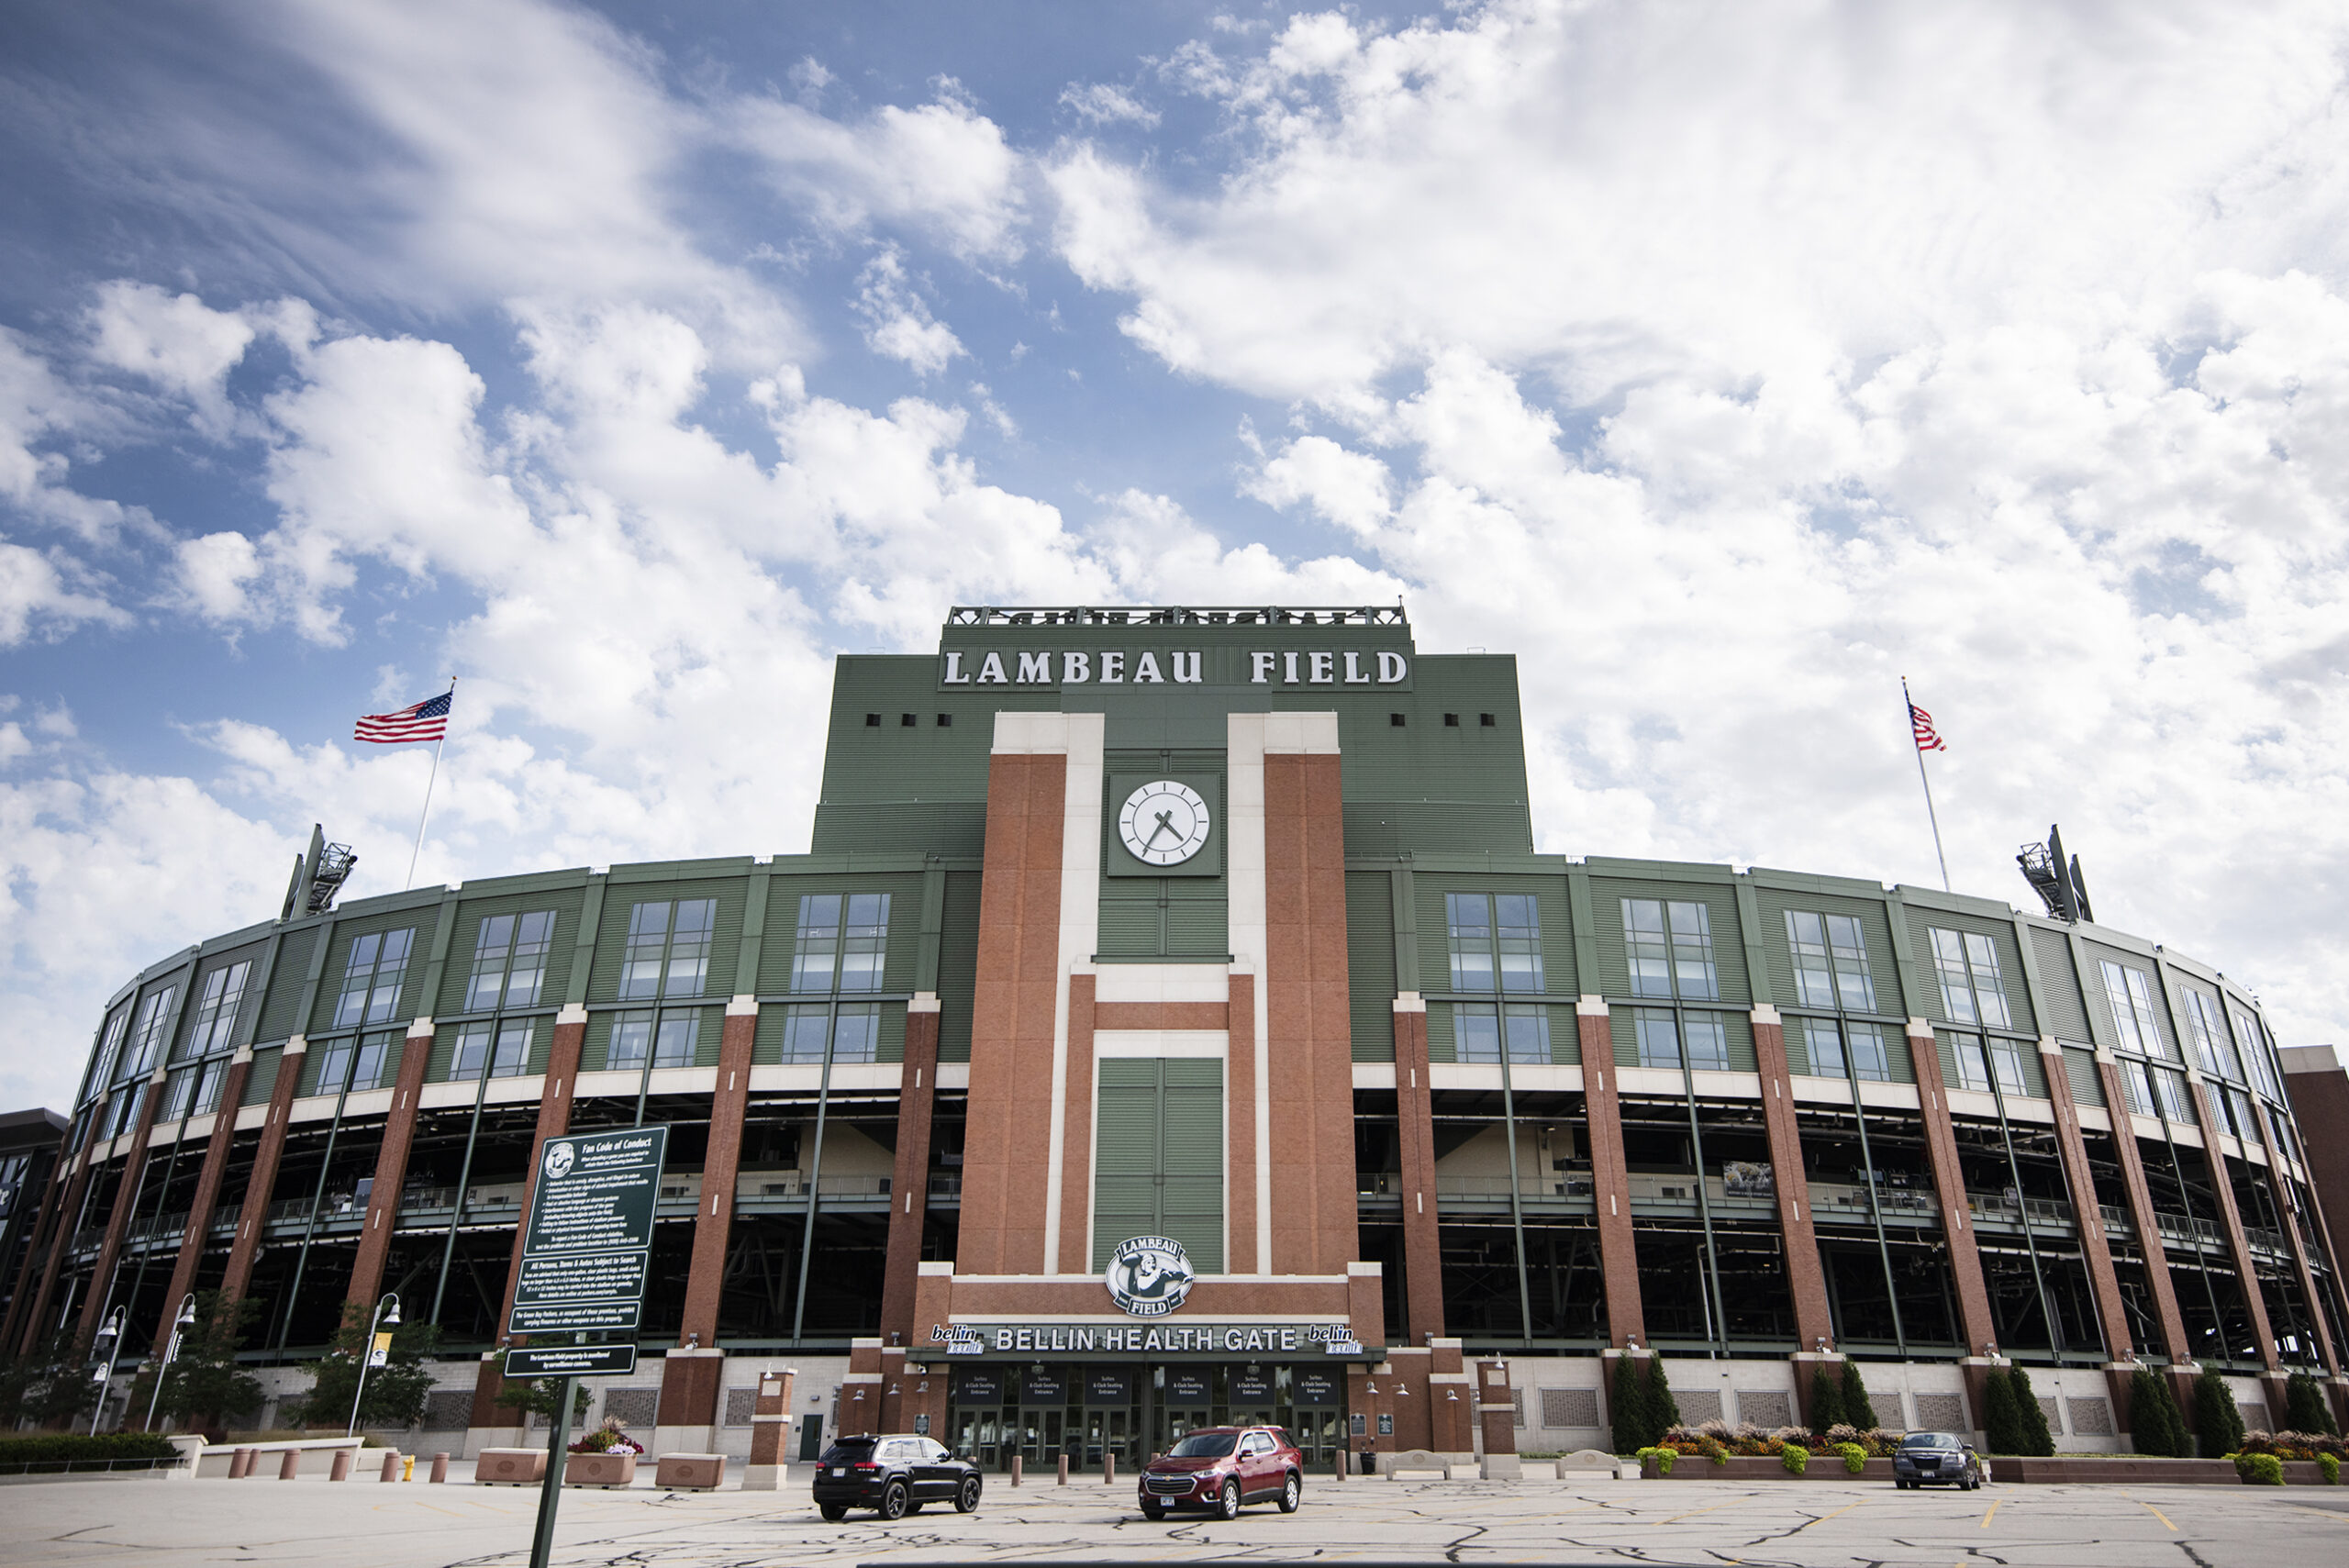 Clouds and a blue sky can be seen behind Lambeau Field